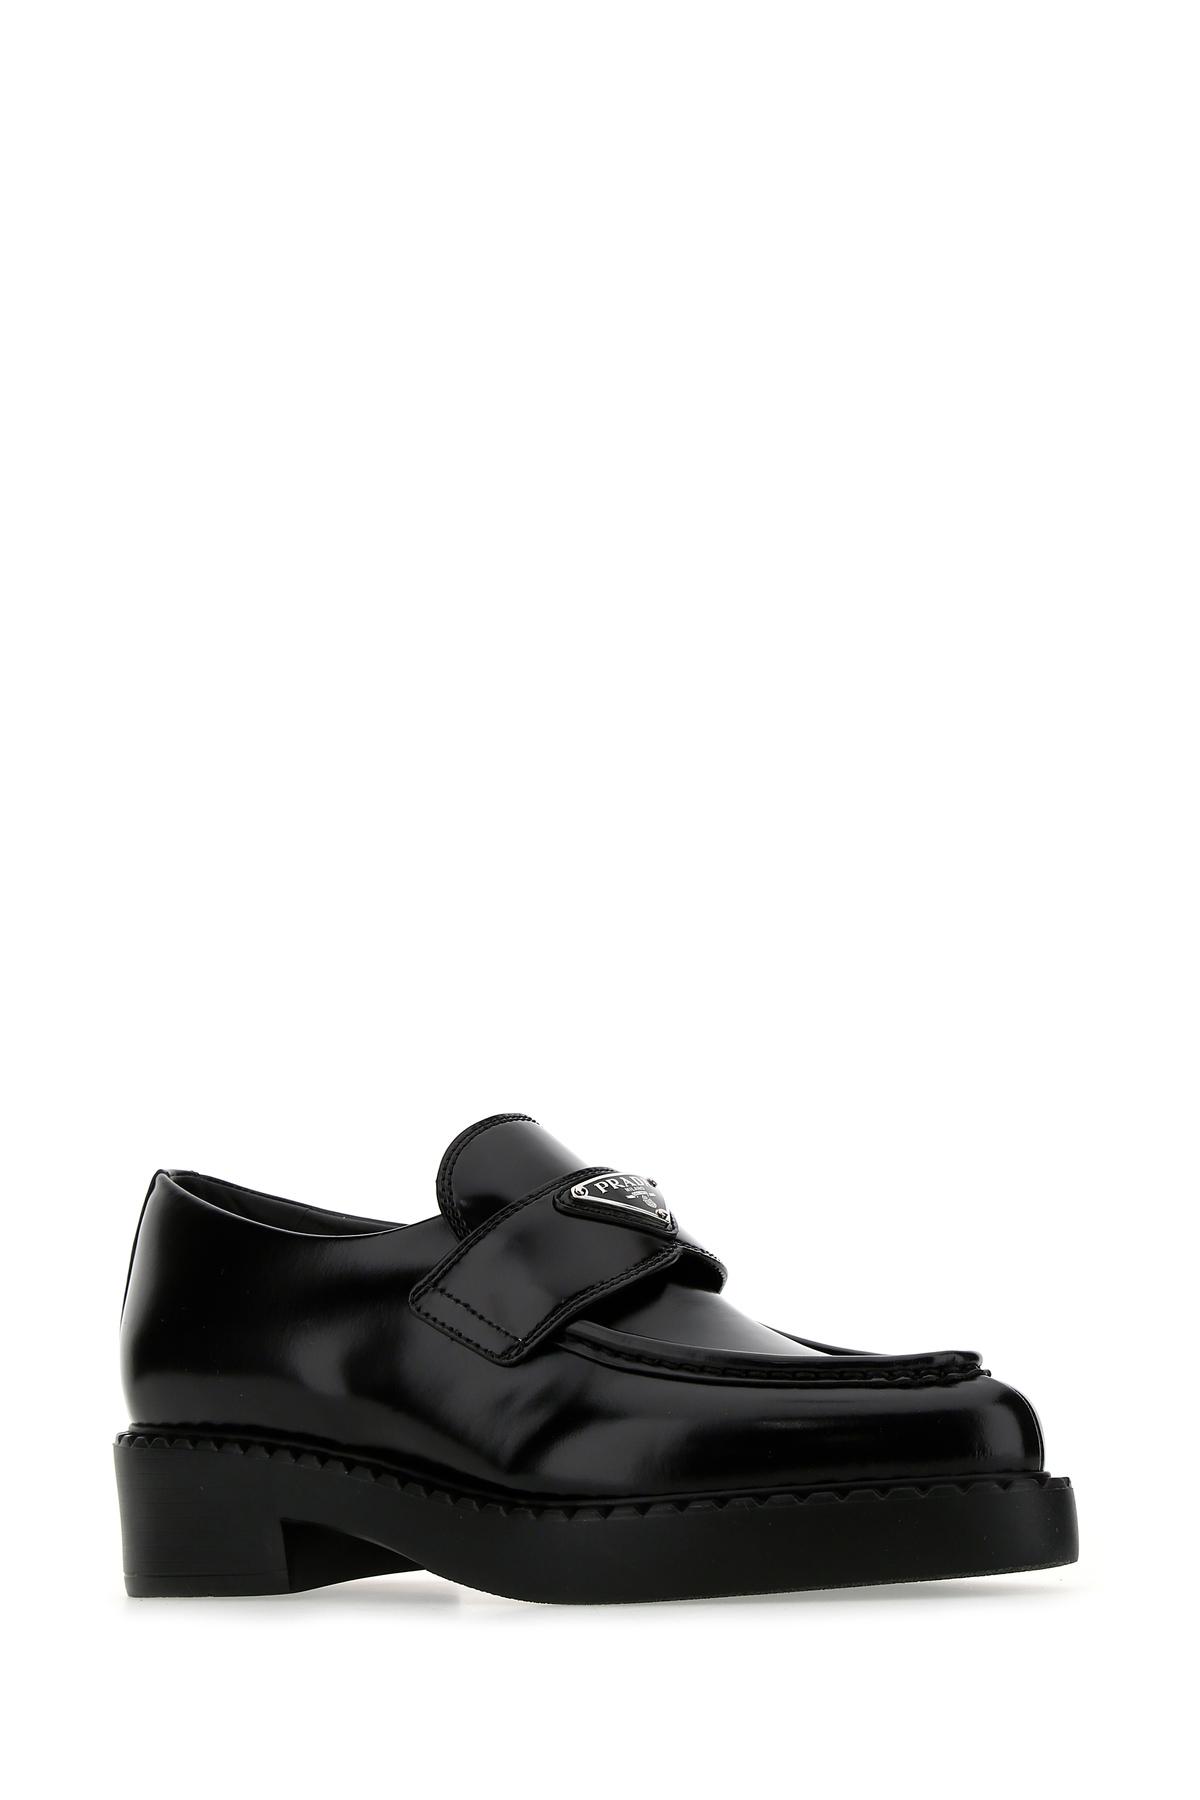 Prada Leather Loafers in Black | Lyst